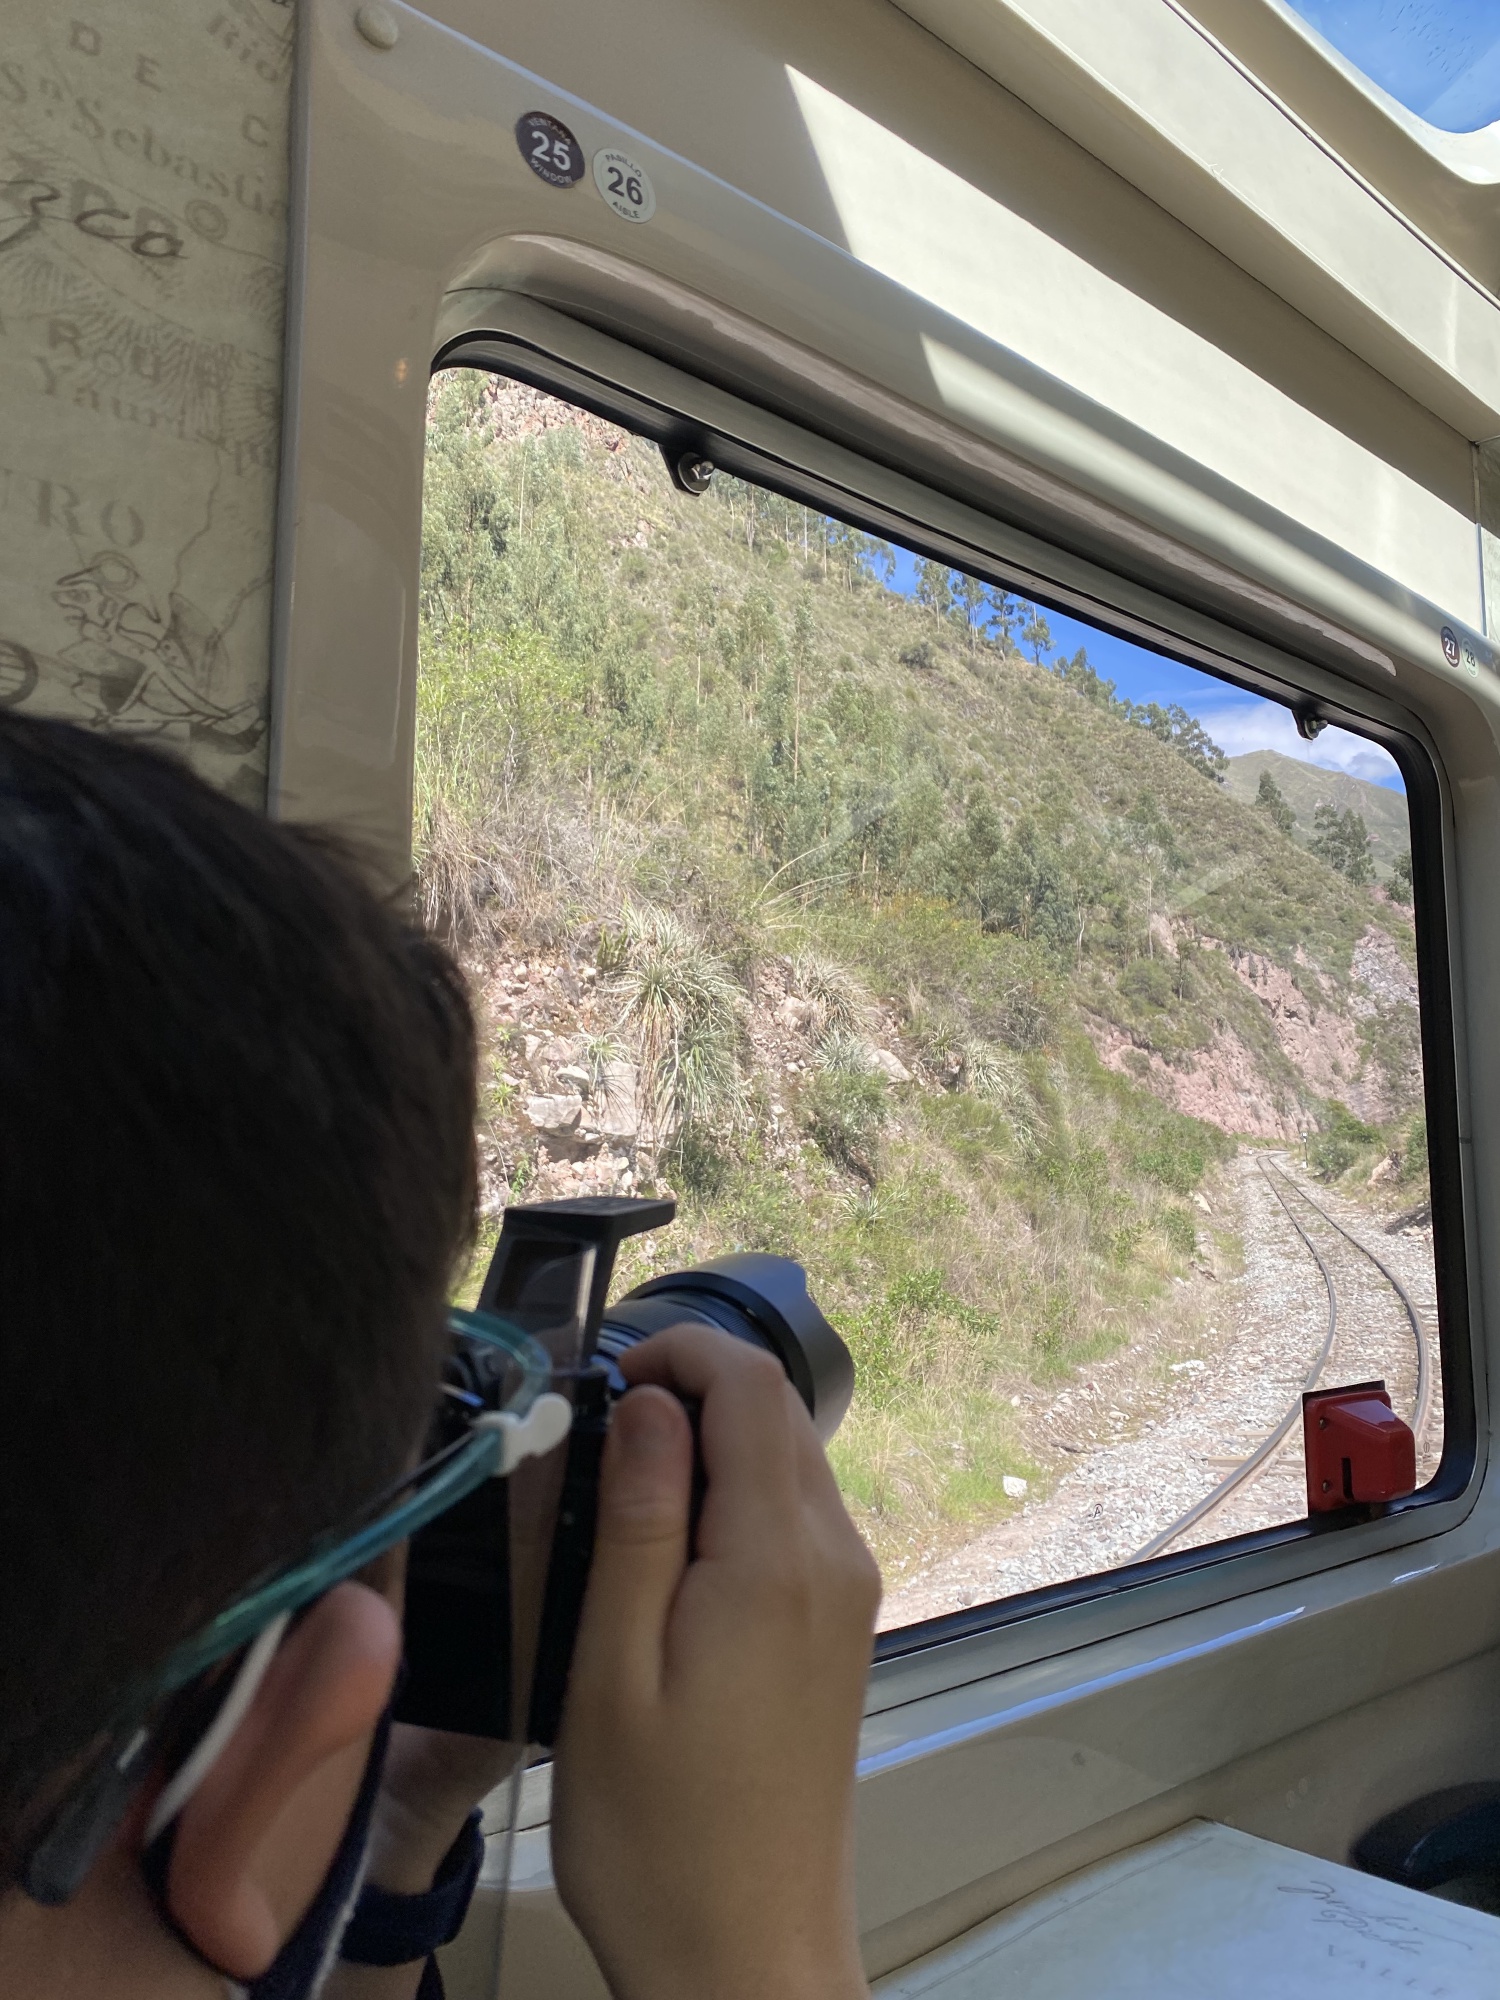 This was the part of the train where it had to maneuver the whole train a bit to get up Machu Picchu 